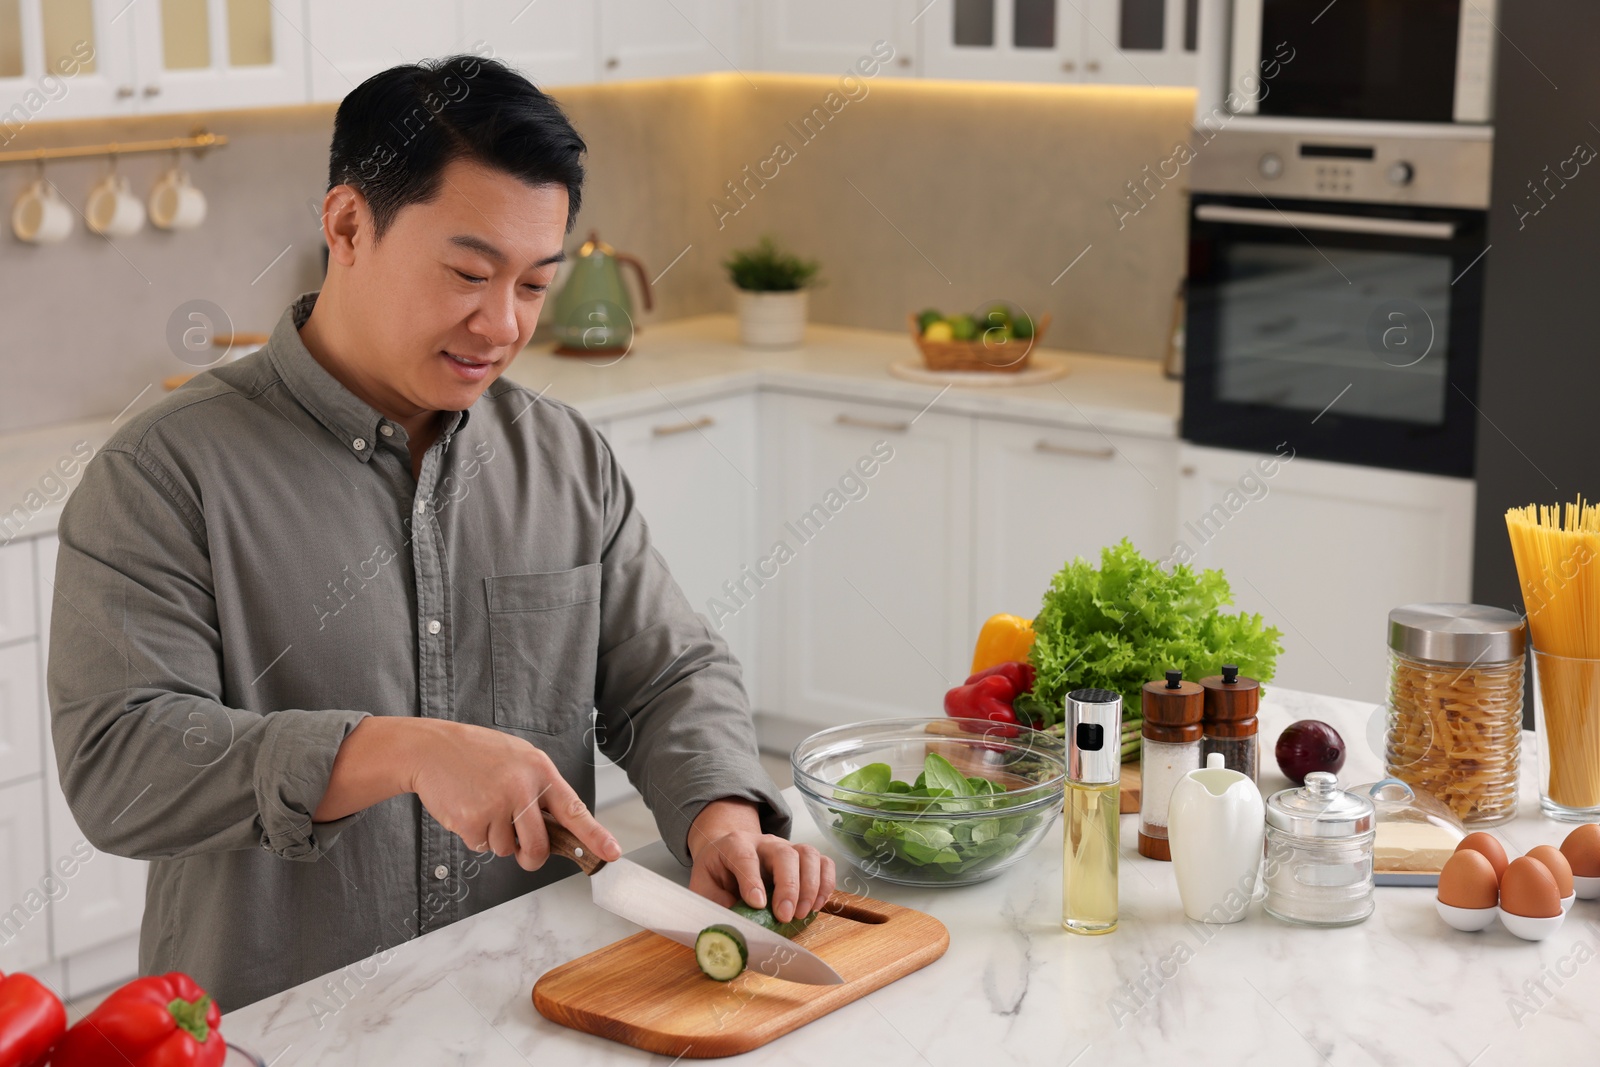 Photo of Cooking process. Man cutting fresh cucumber at countertop in kitchen